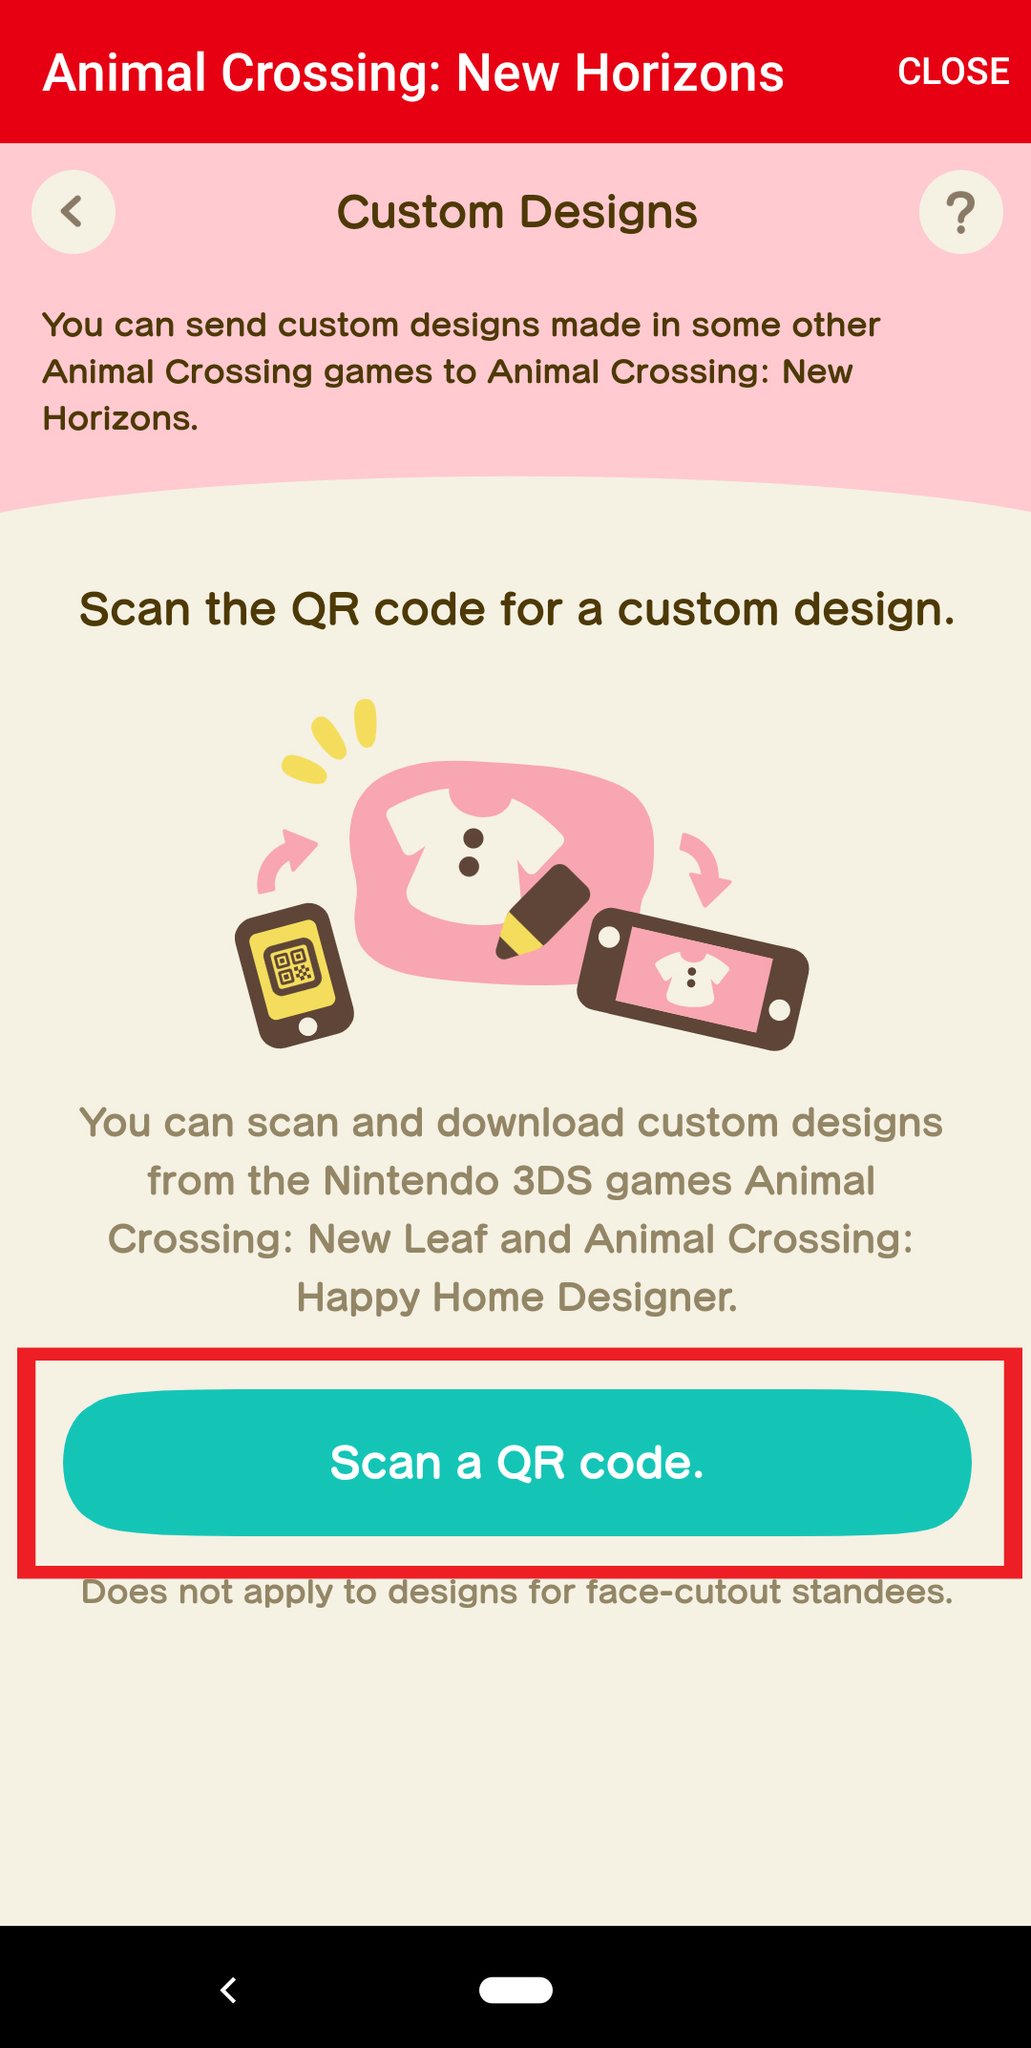 How to scan QR codes in ACNH: Select scan a QR code